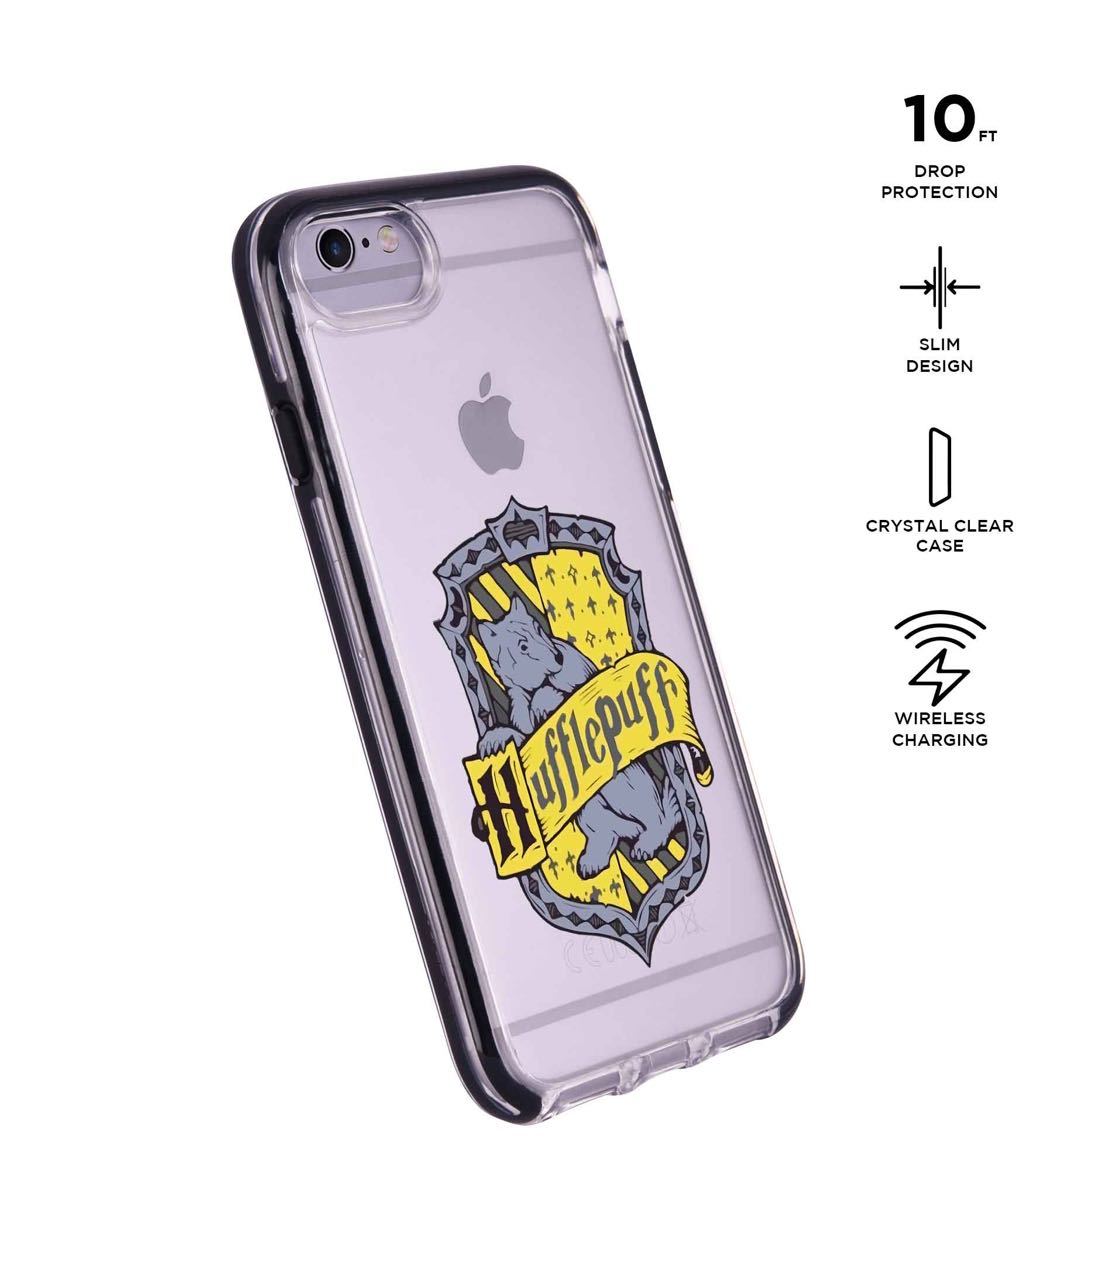 Crest Hufflepuff - Extreme Phone Case for iPhone 6 Plus